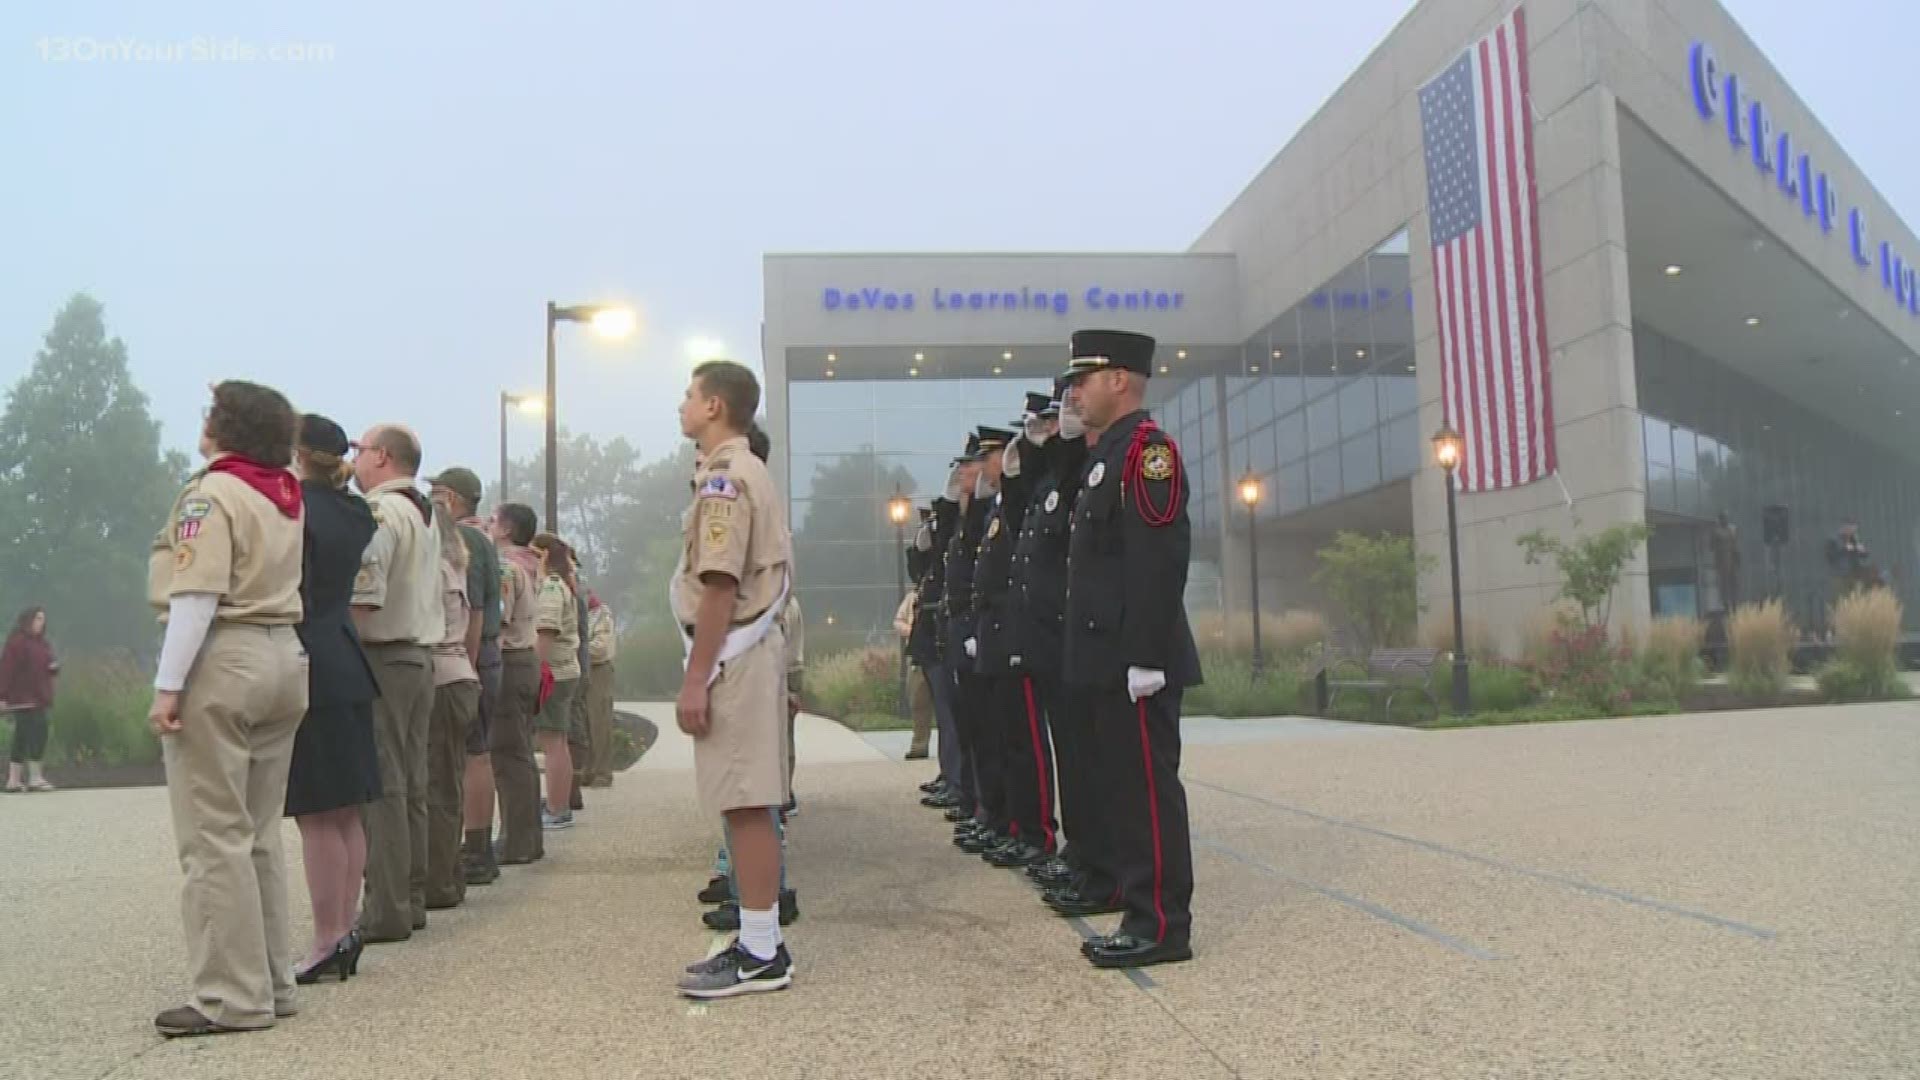 18 years later, Grand Rapids still takes time each September to remember those who died on September 11, 2001.